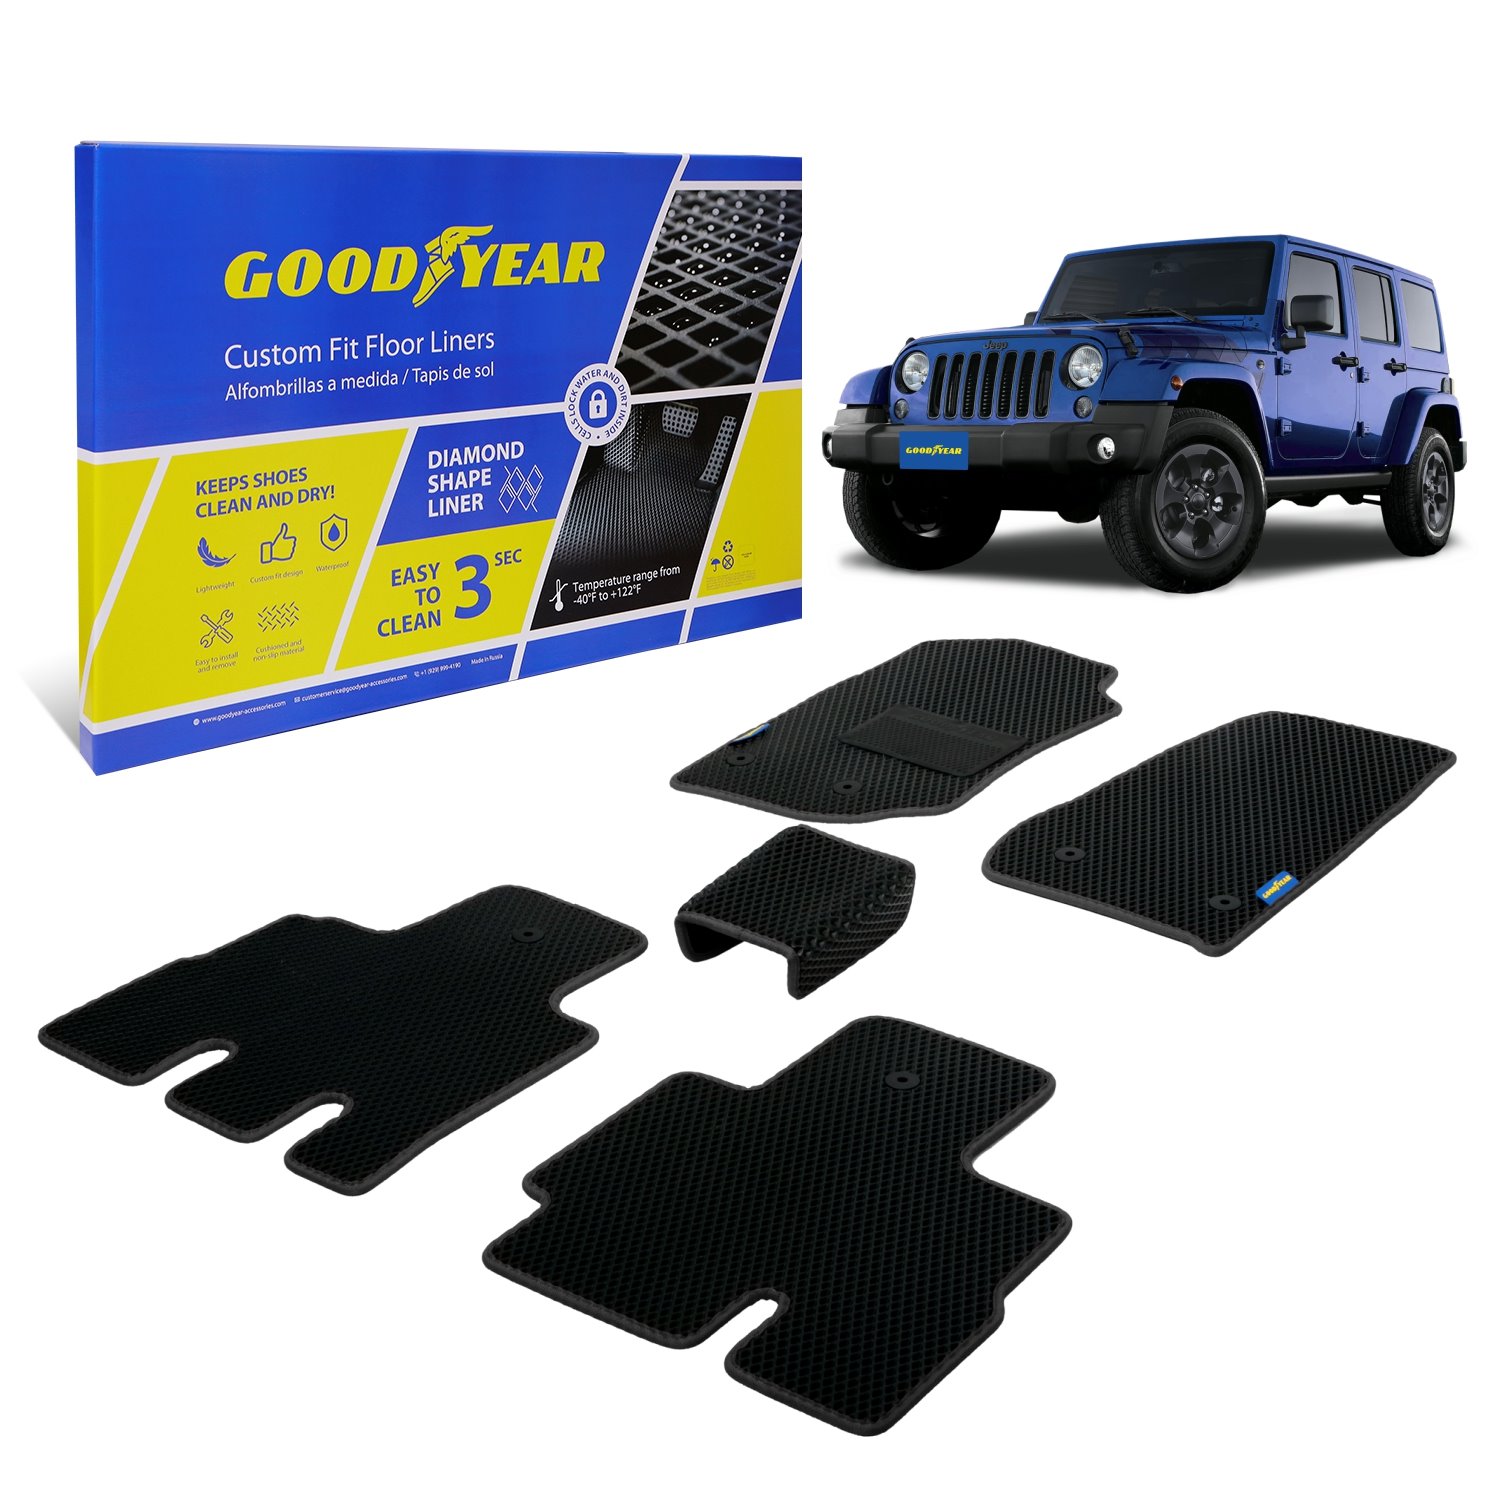 Goodyear Custom-Fit Floor Liners for 2014-2018 Jeep Wrangler